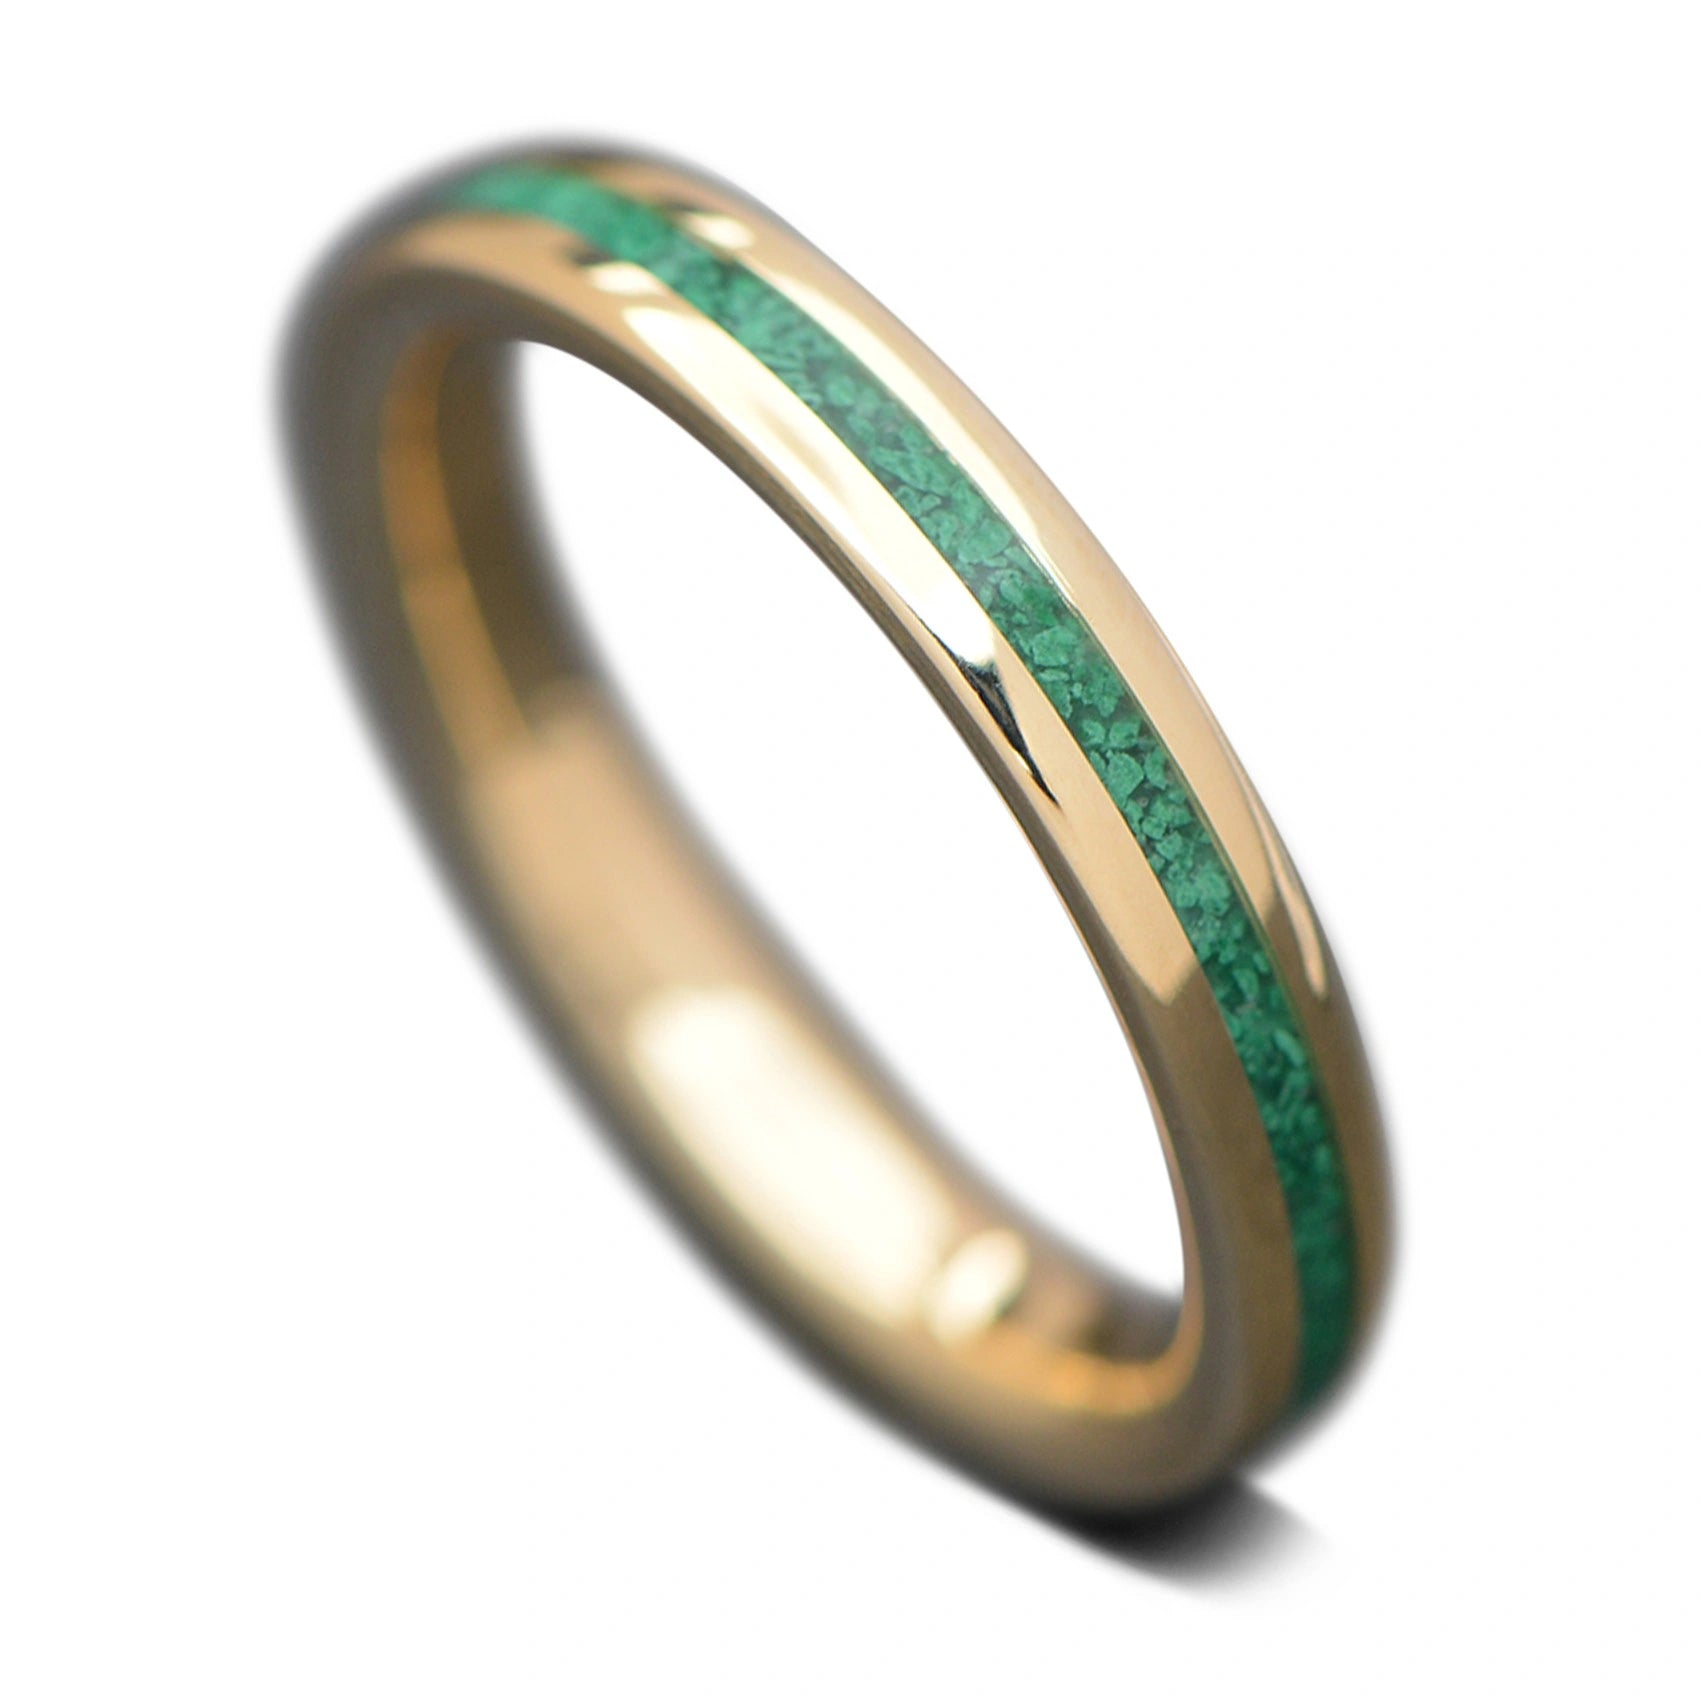 Unique Yellow Gold Wedding Band with Green Malachite Inlay | 3mm